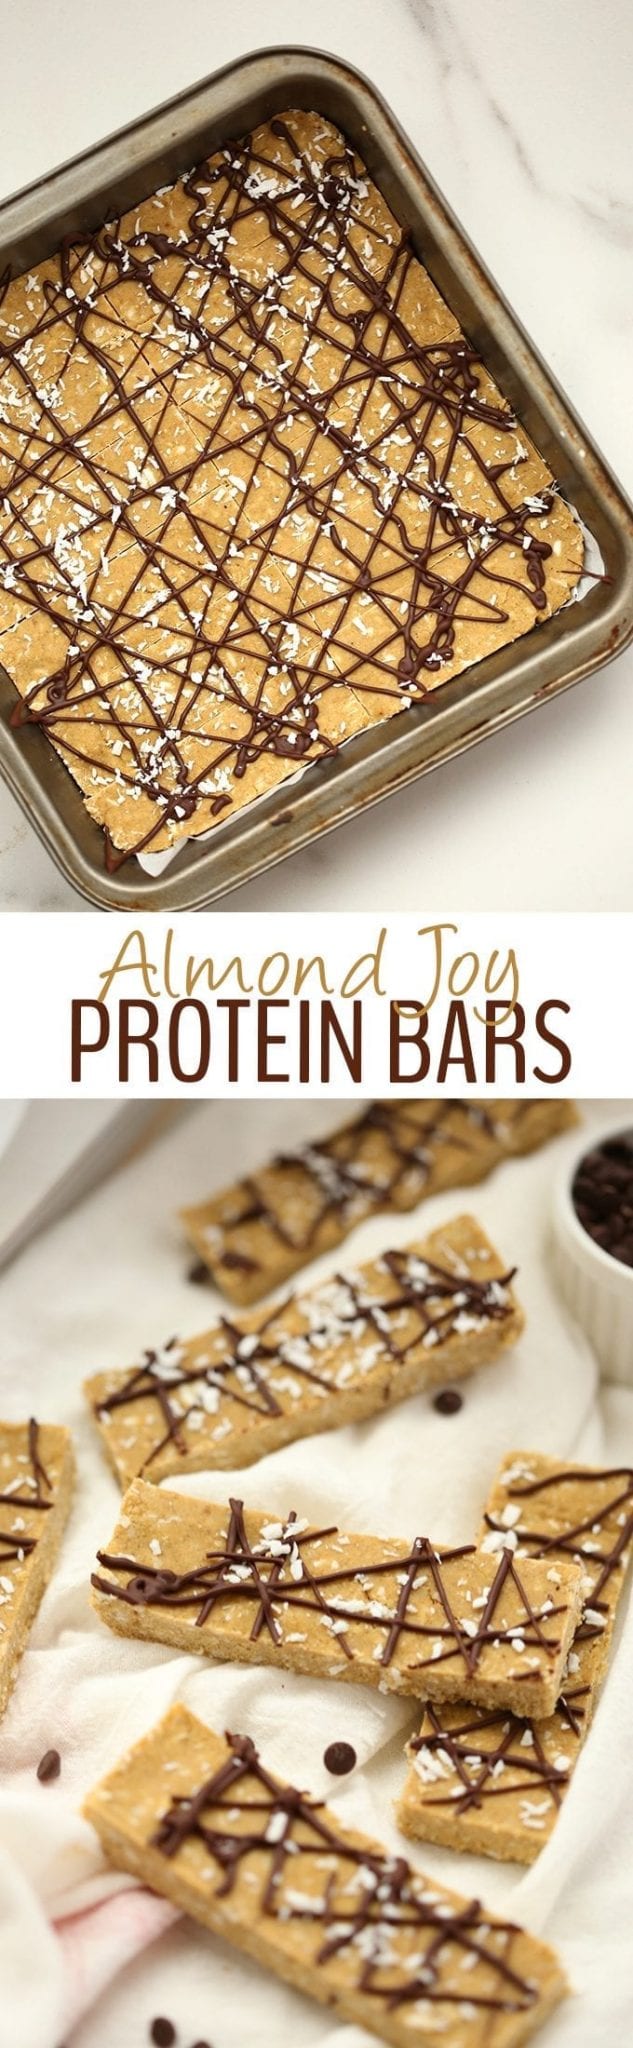 Ditch the store-bought and go for one of these Vegan Almond Joy Protein Bars instead. Made with plant-based protein powder and ready in under 30 minutes (without a food processor!) these healthy, no-bake protein bars will become your new favorite snack.